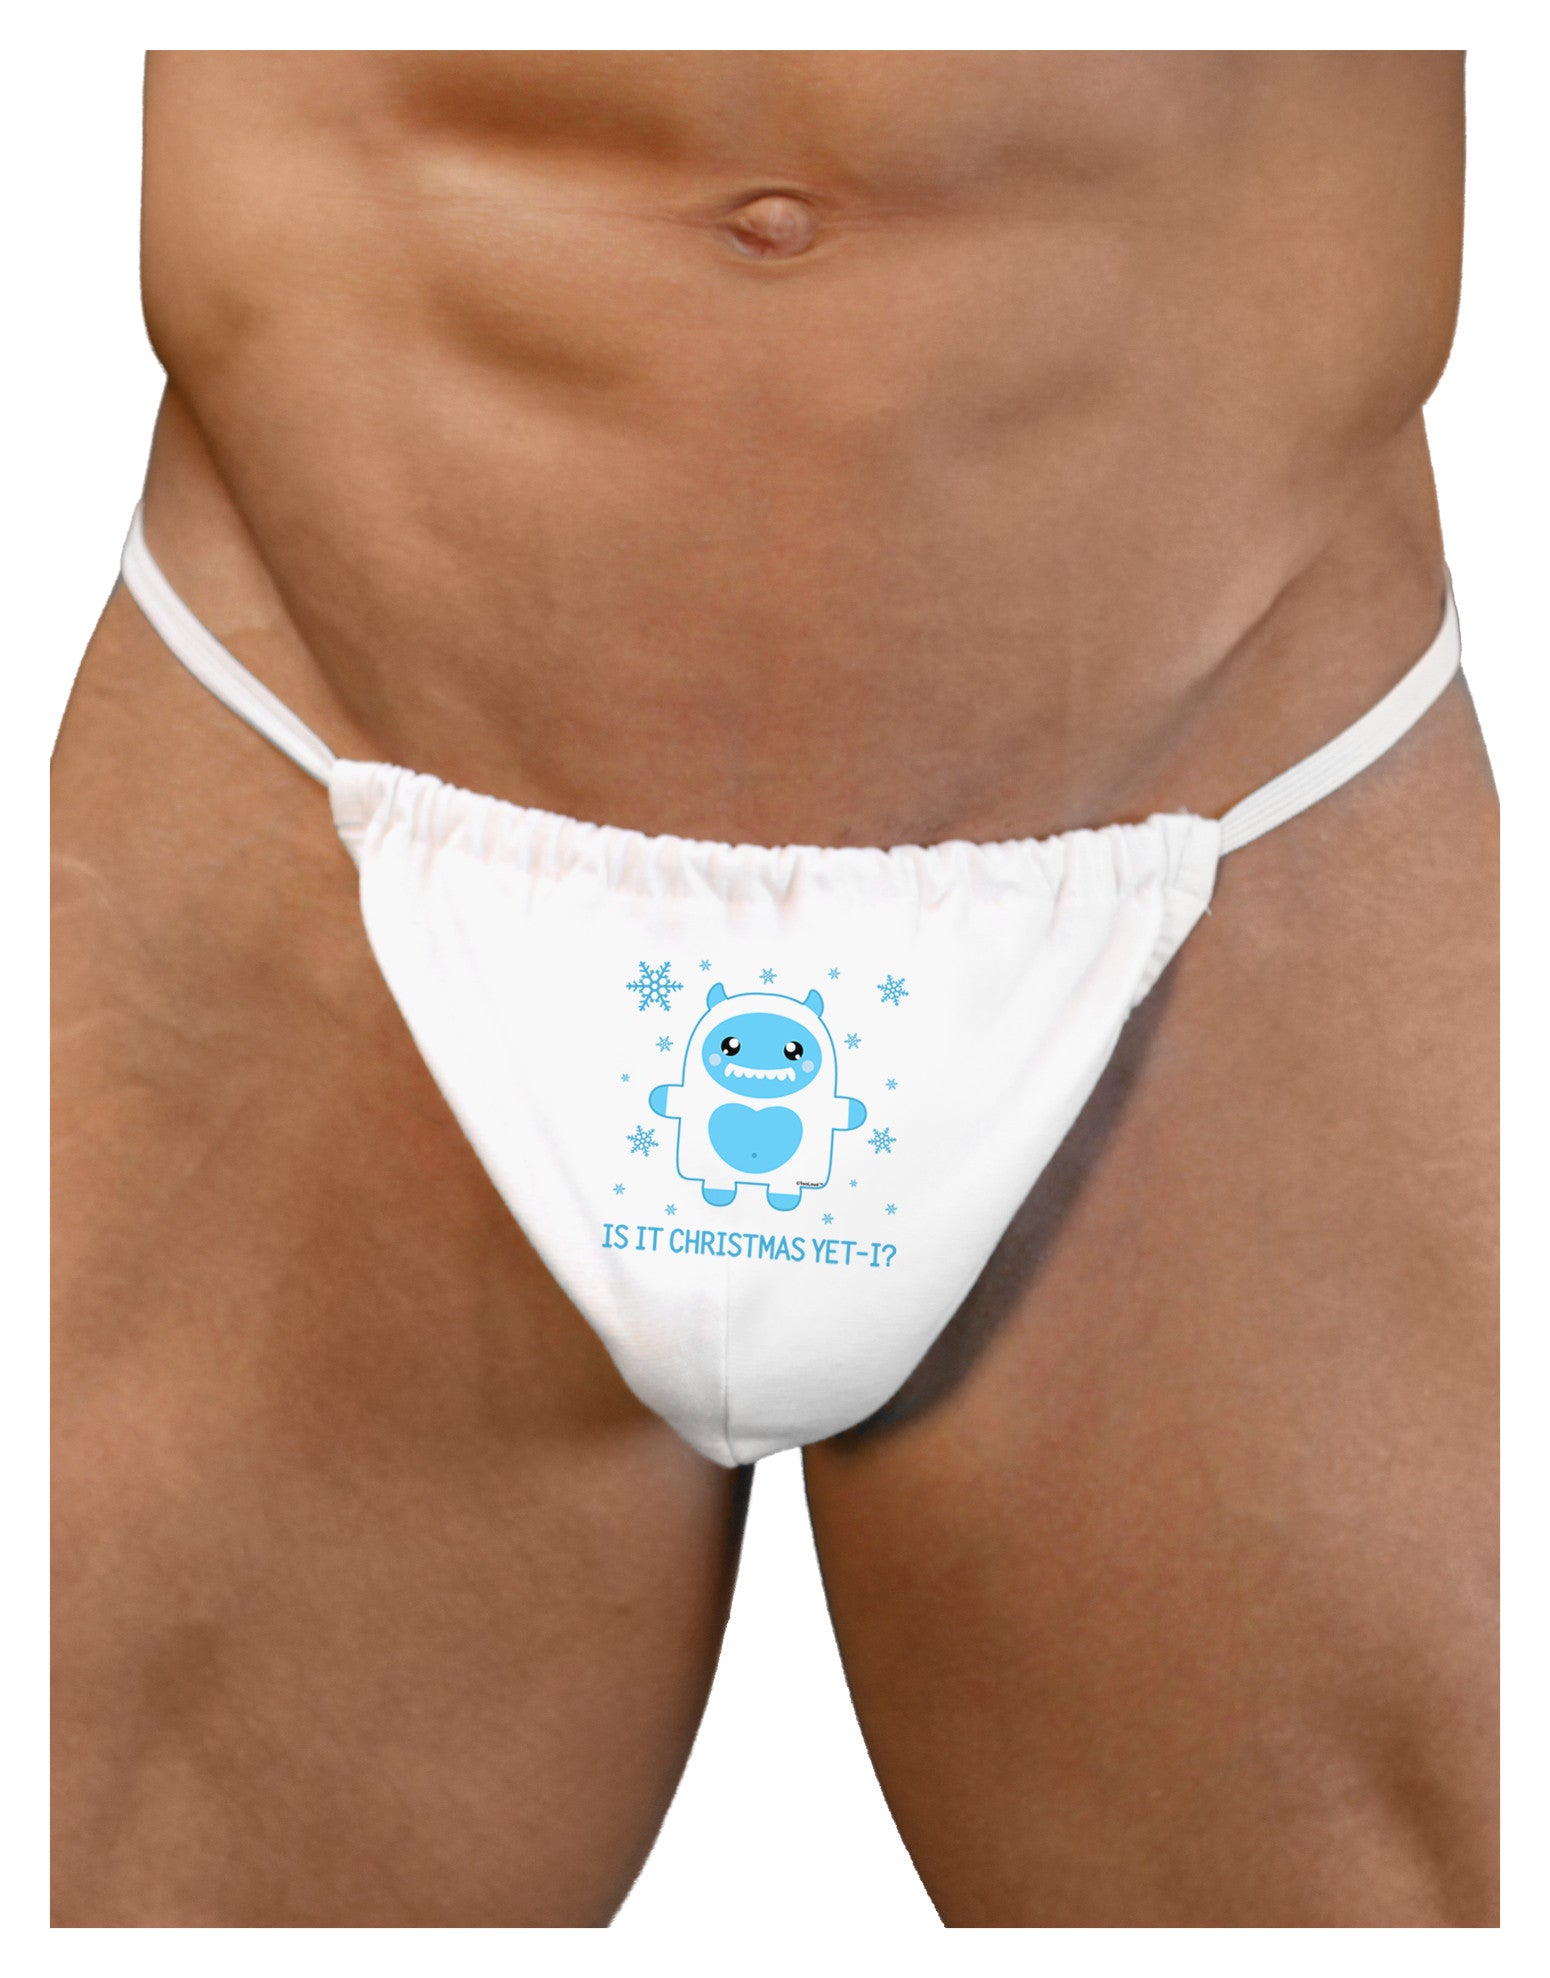 LOBBO Is It Christmas Yet - Yeti Abominable Snowman Mens G-String Underwear White / Large/XL